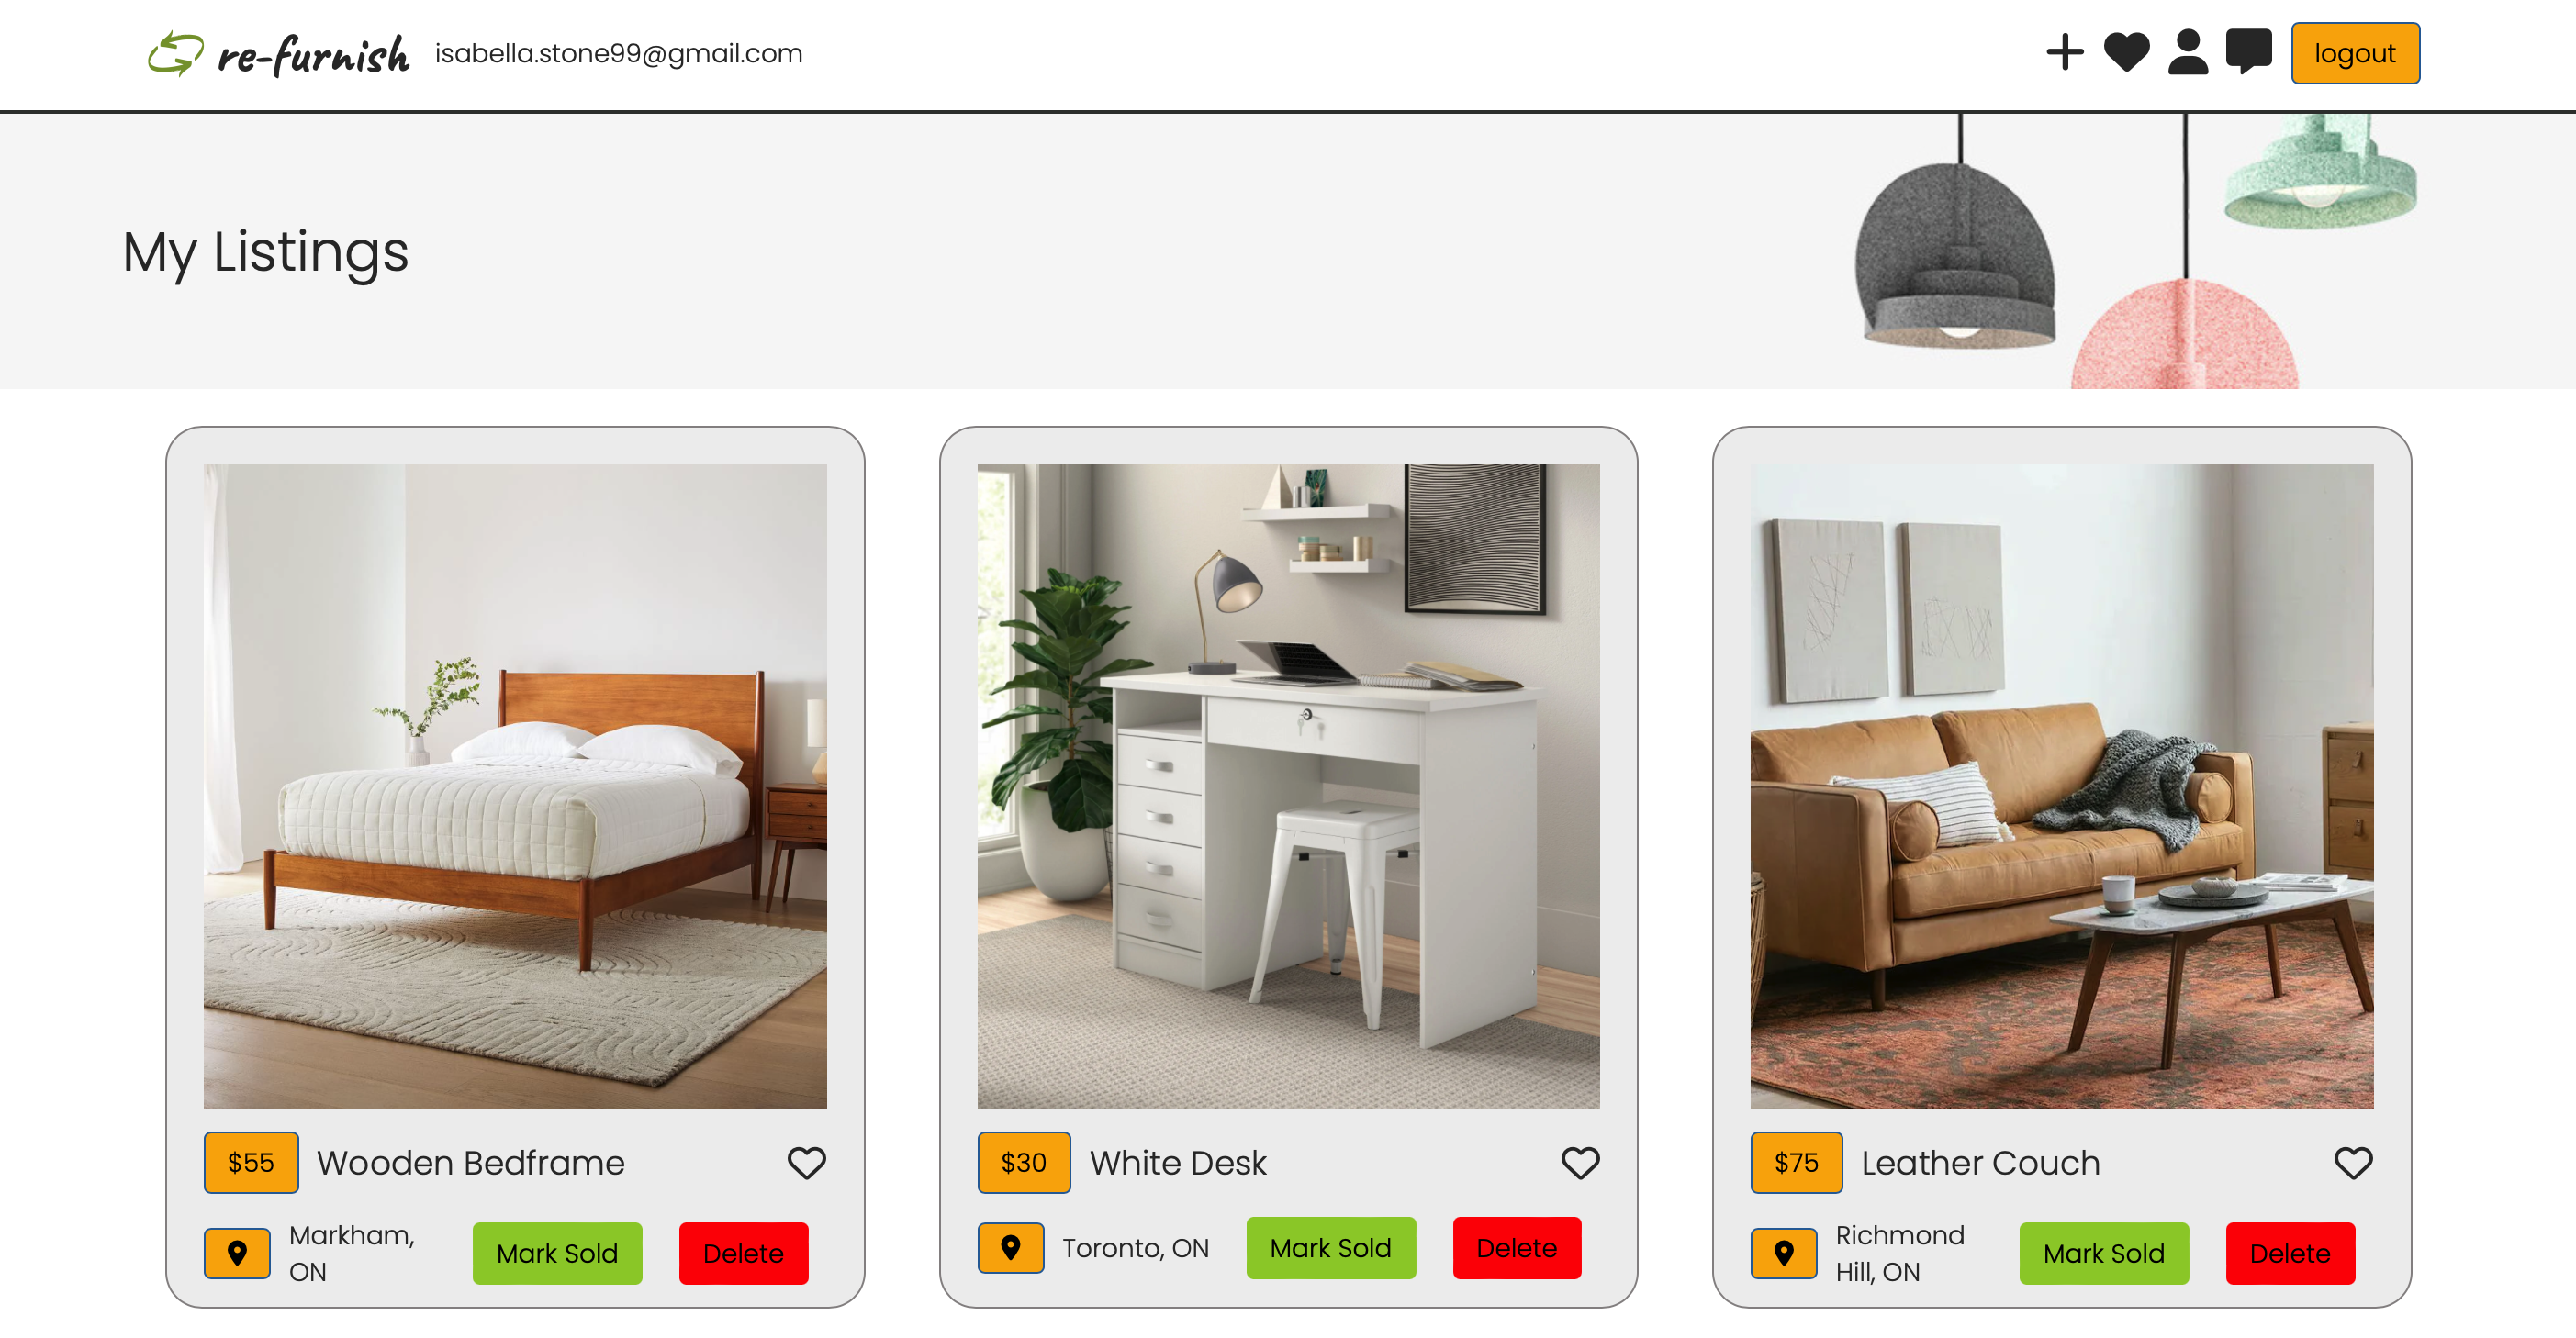 Image of a re-furnish app